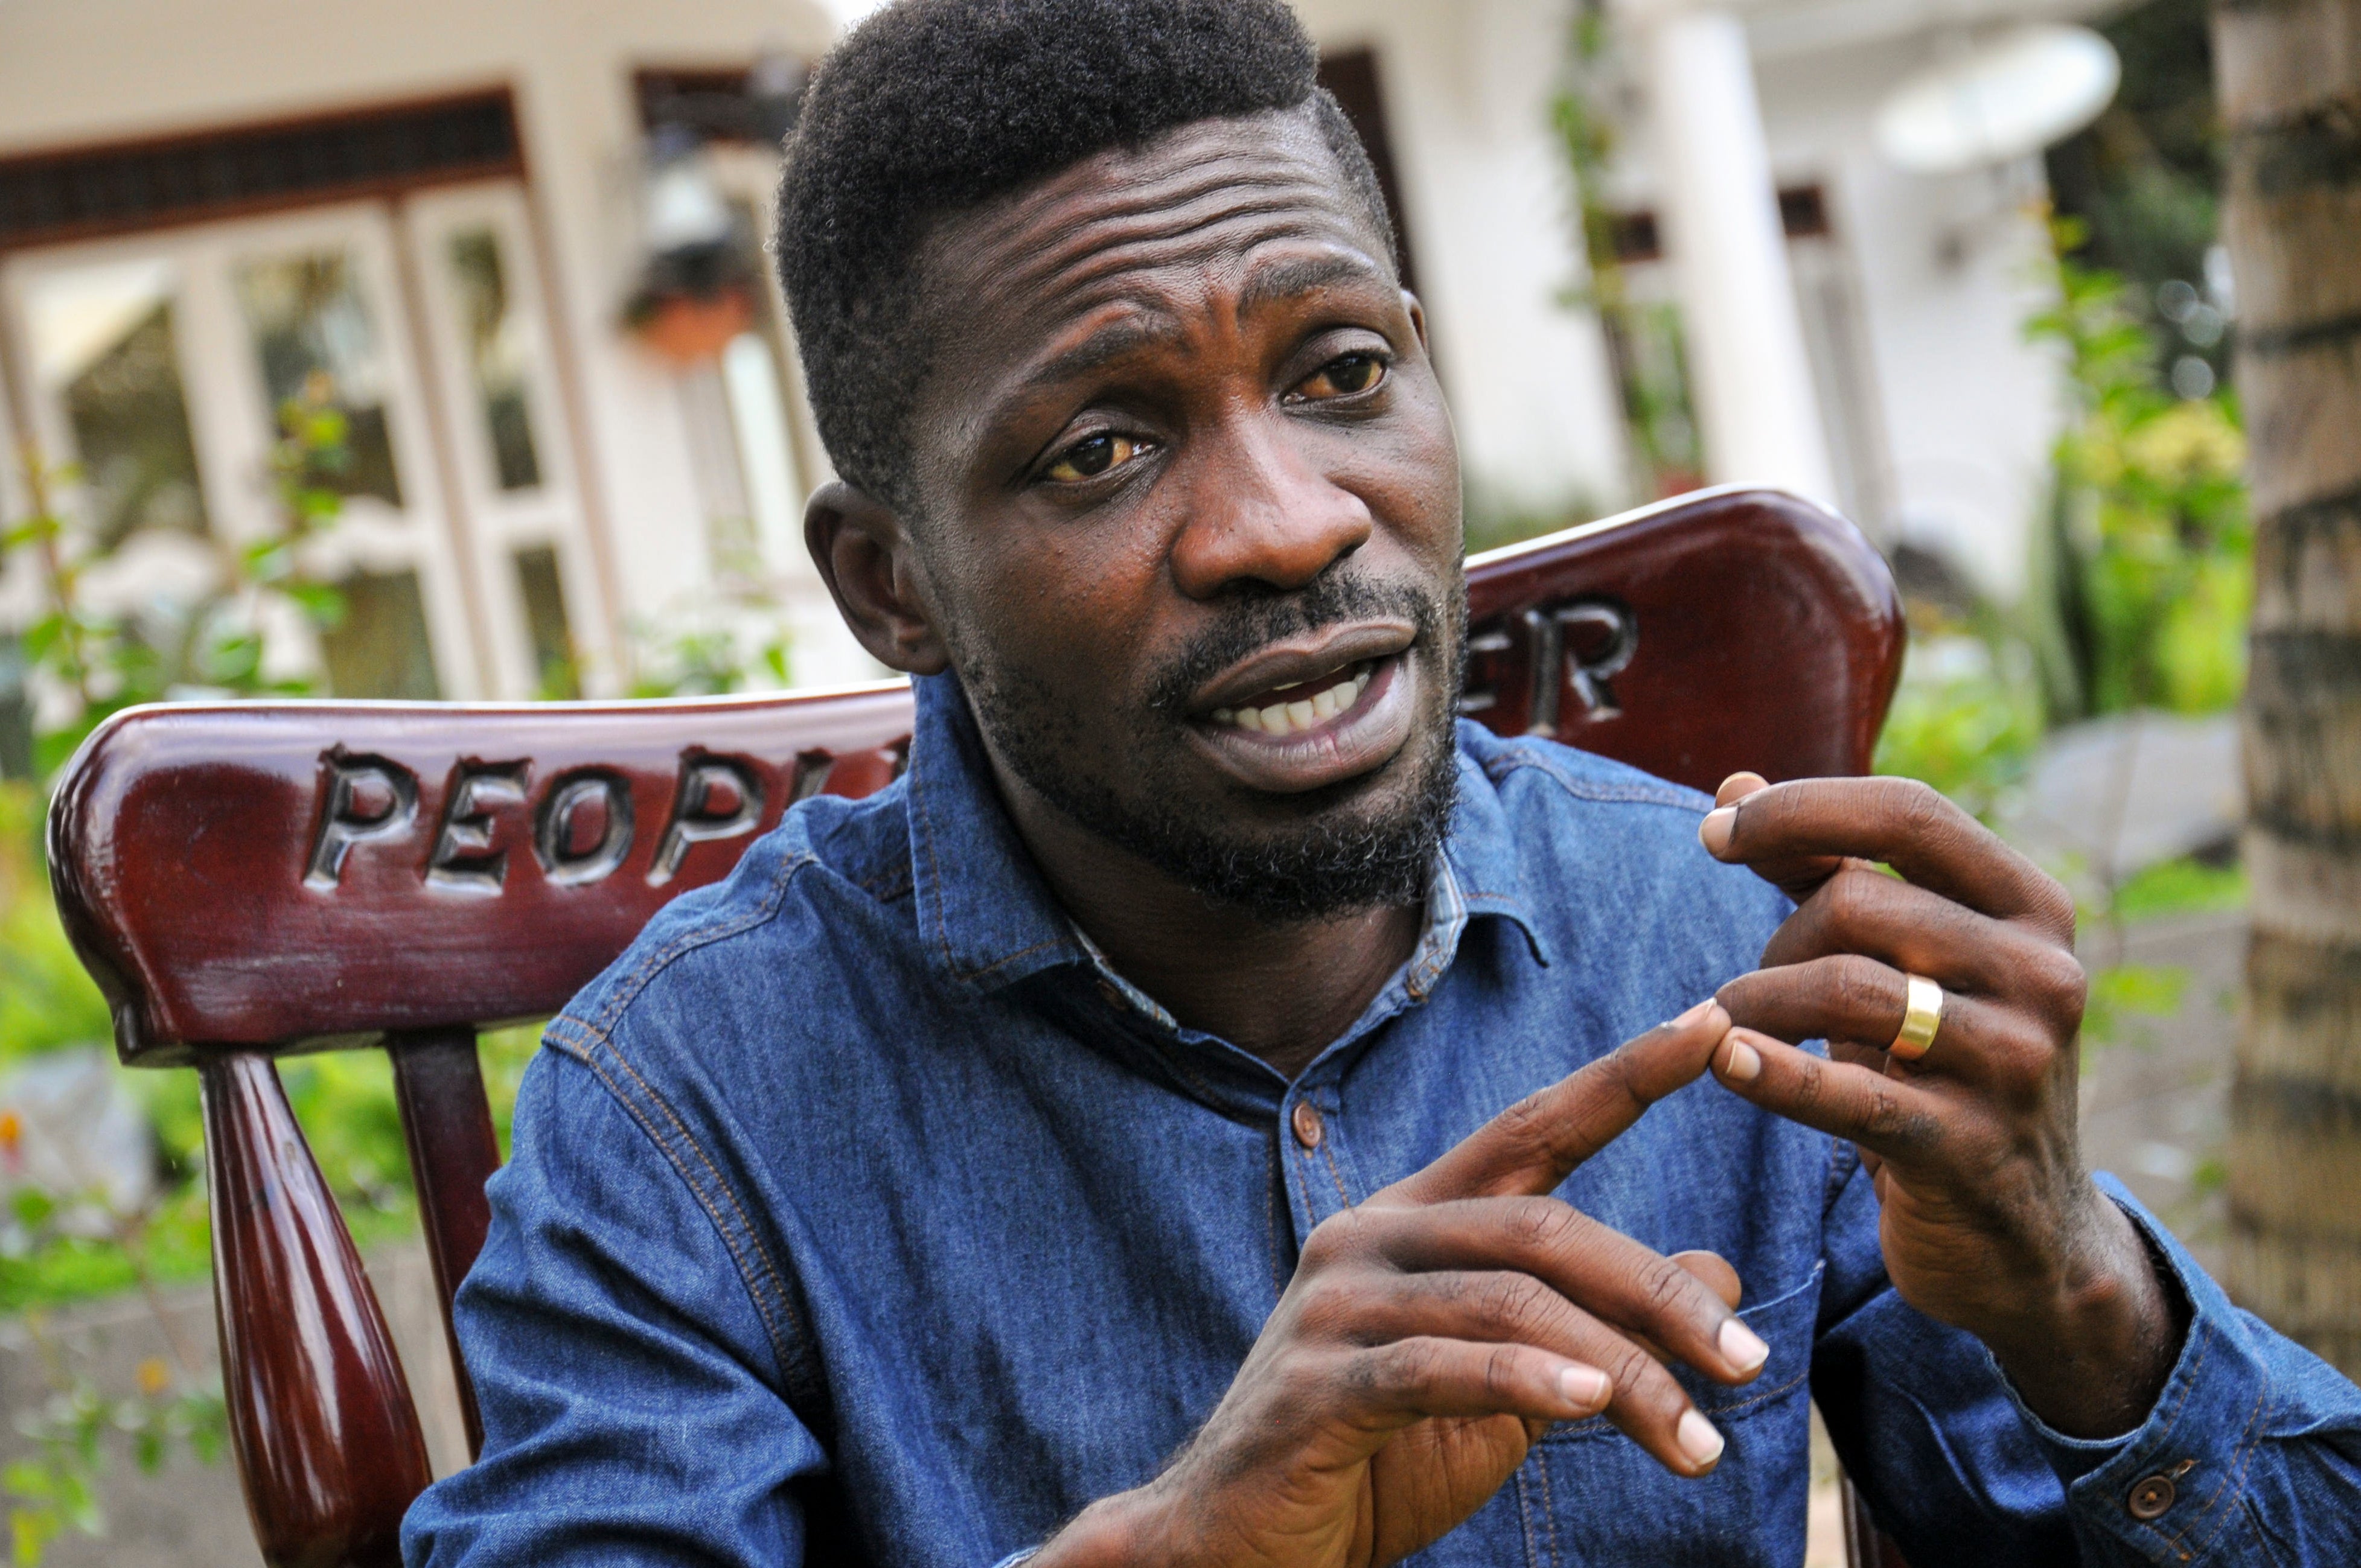 ‘Whatever is being declared is a total sham’: Bobi Wine, pictured in March 2020, says the election has been rigged